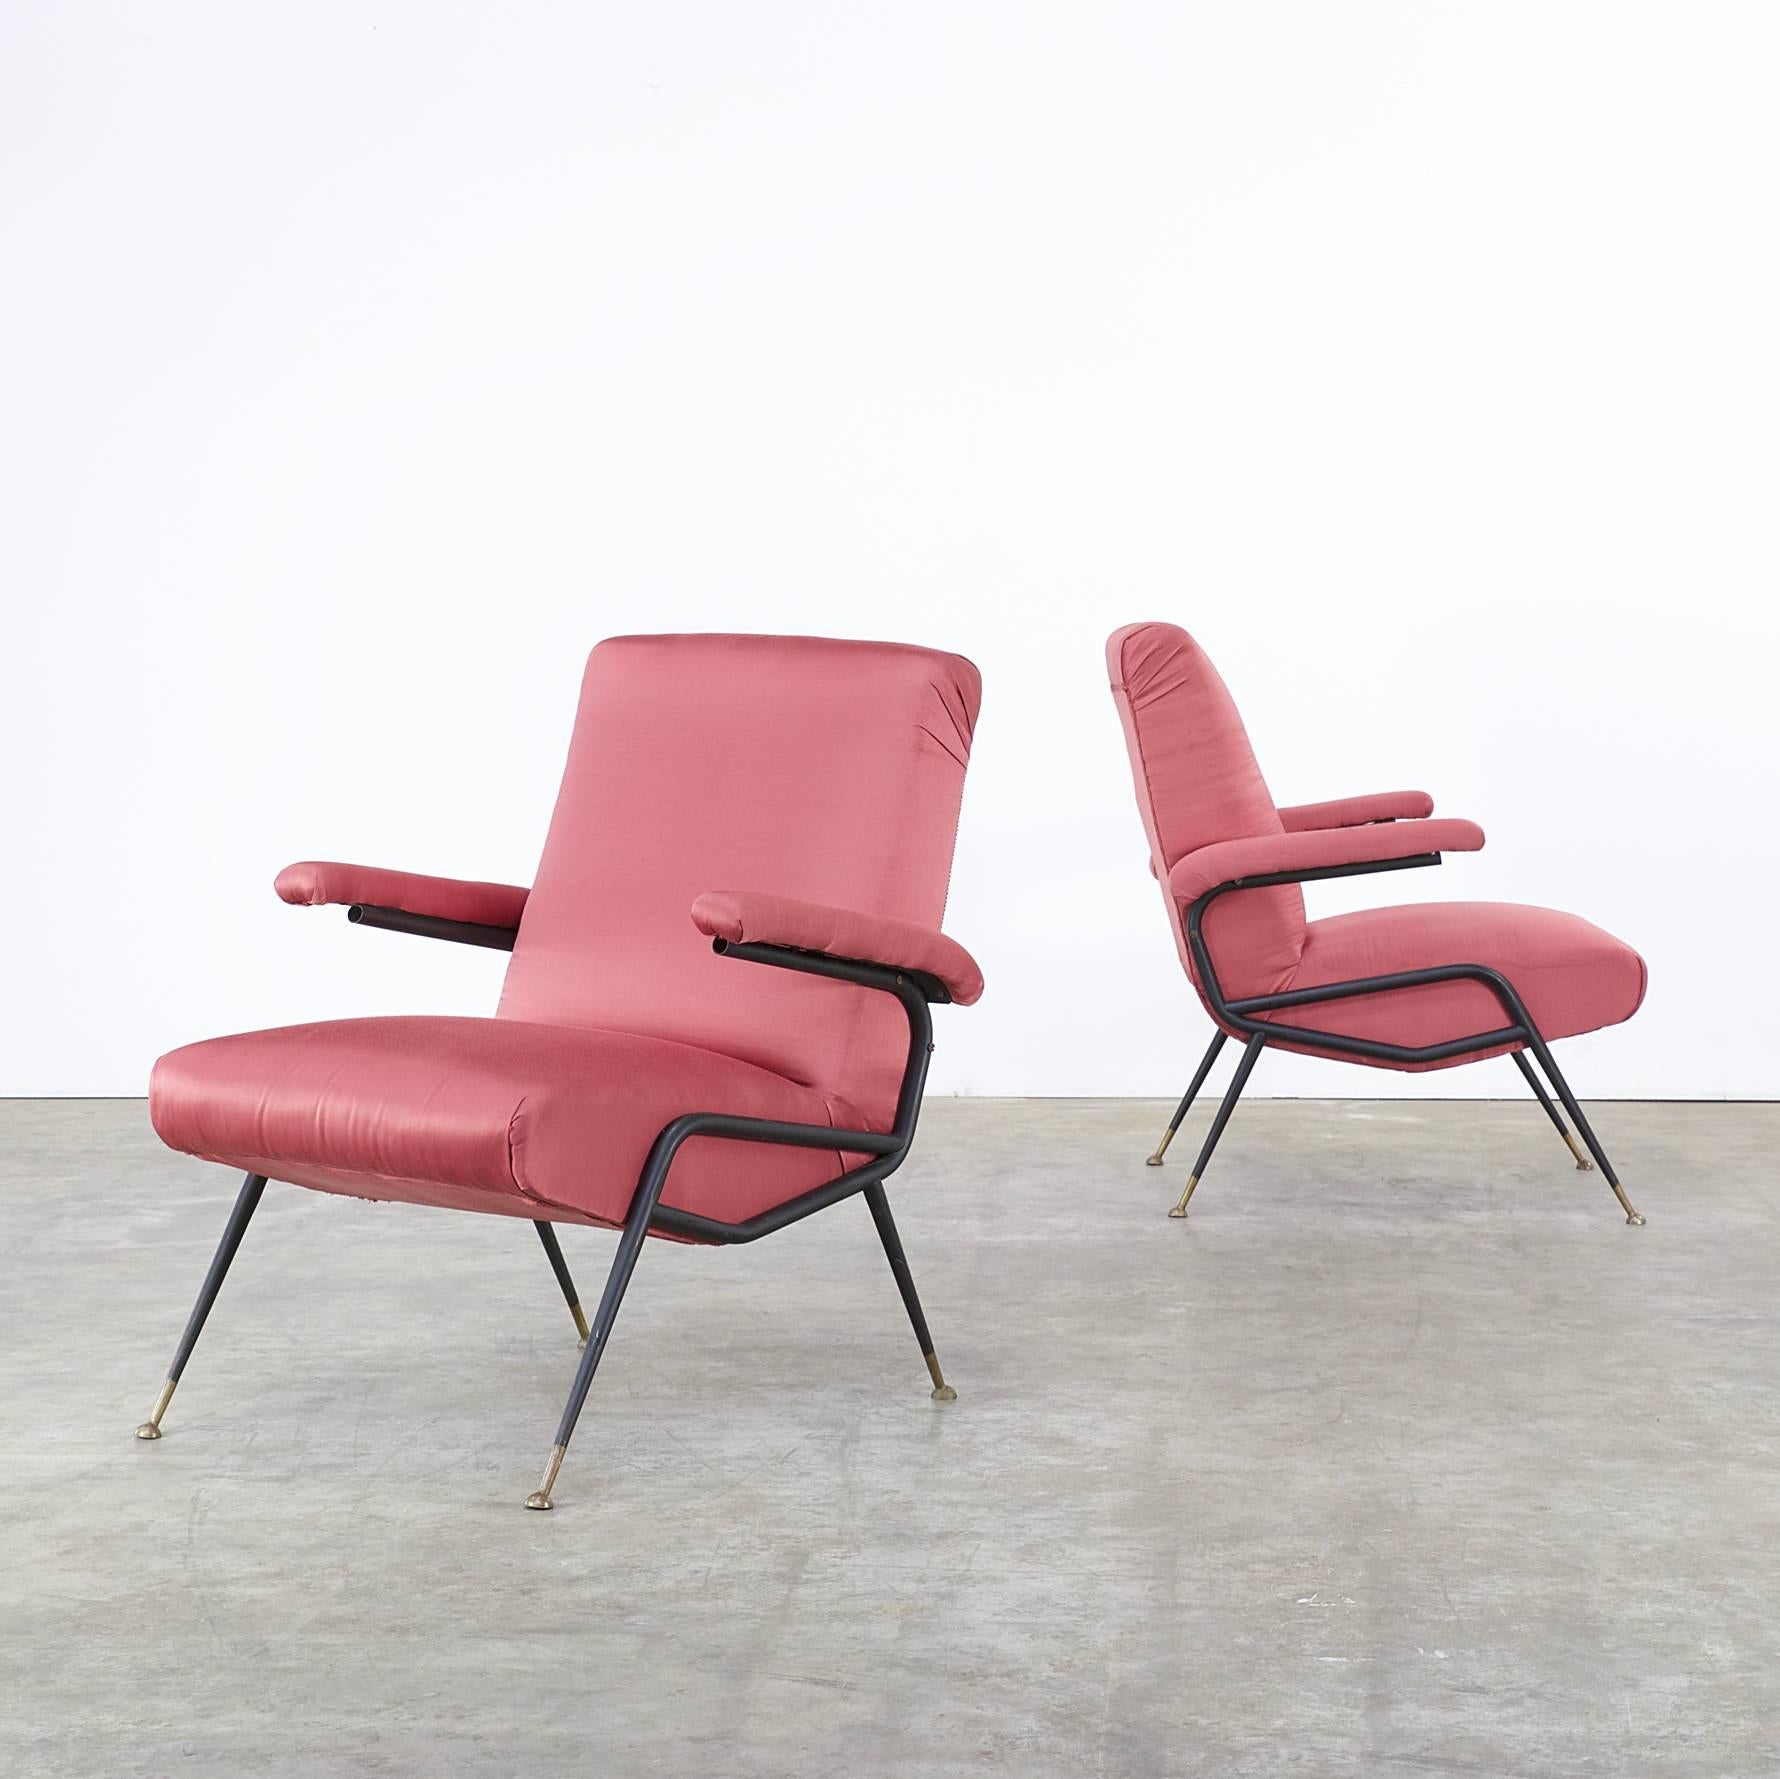 One set of two 1960s Italian design chair in old red fabric, set of two. Metal frame, brass socks, Good condition, wear consistent with age and use. Dimensions: 64cm (W) x 68cm (D) x 82cm (H), seat H 38cm.